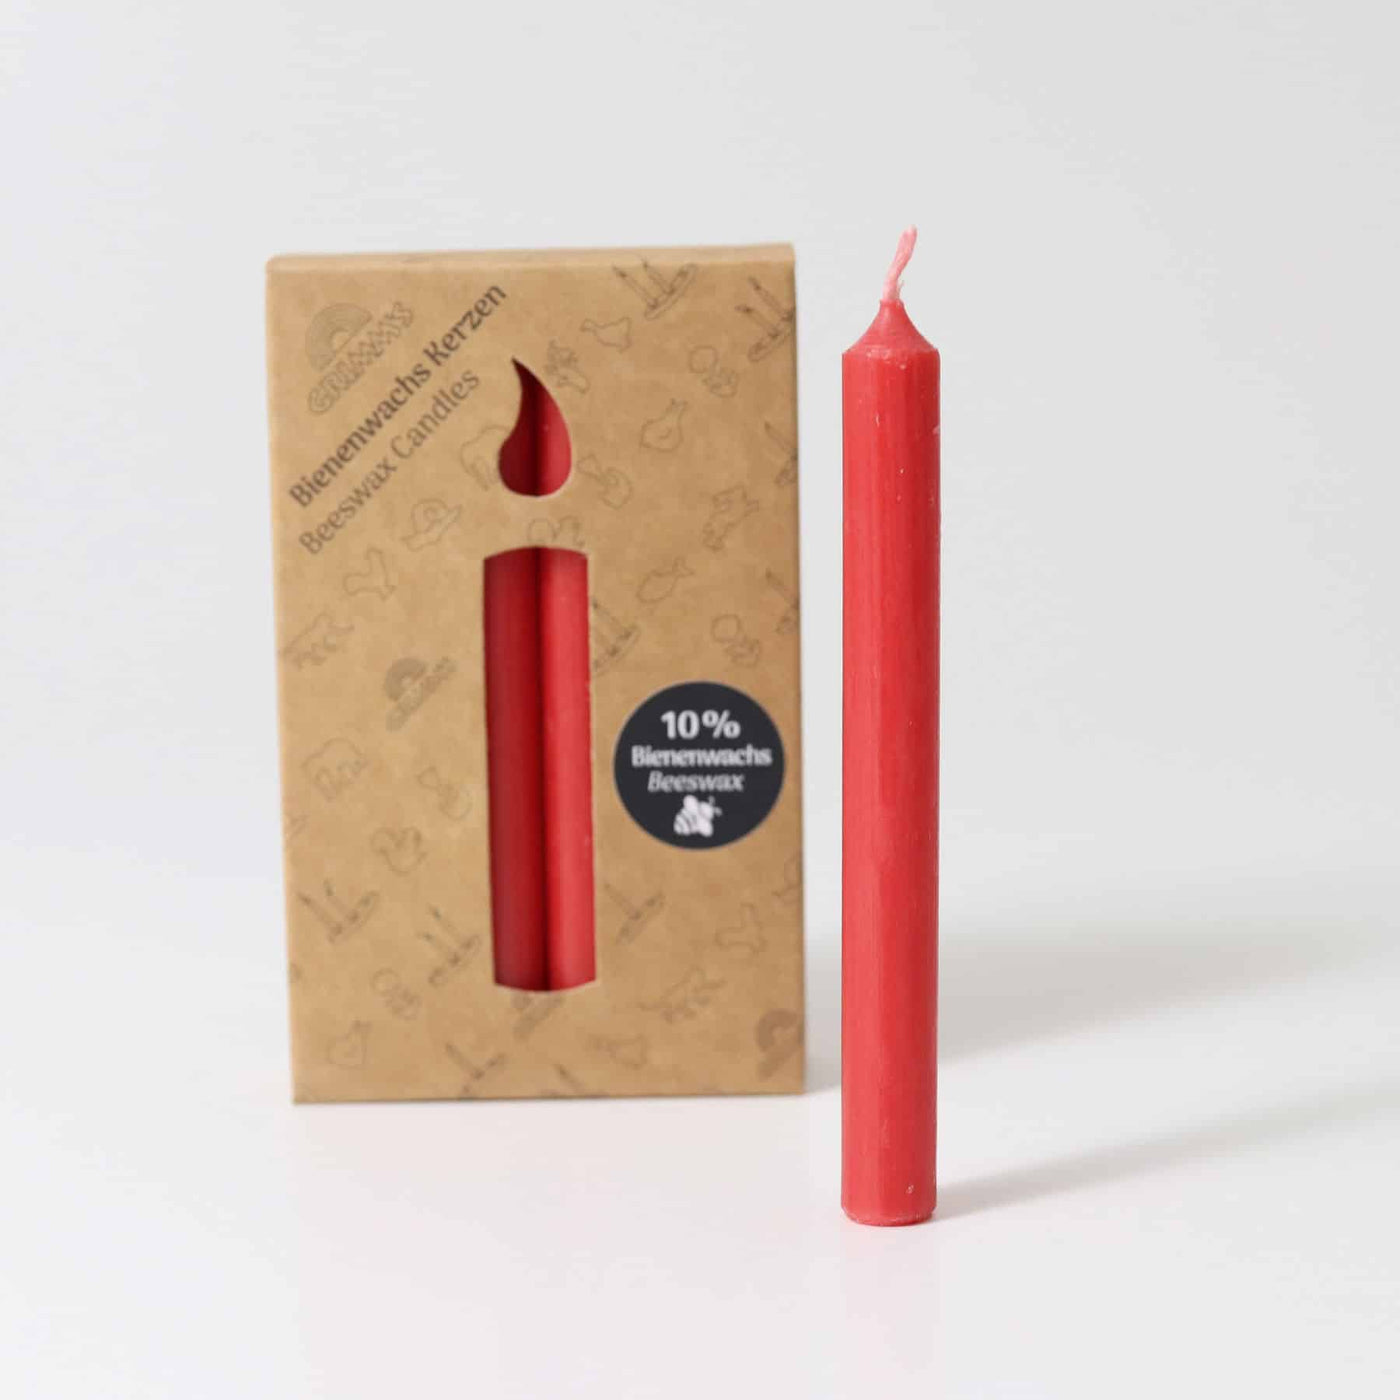 05113 Grimms Beeswax Candles - Red (2)